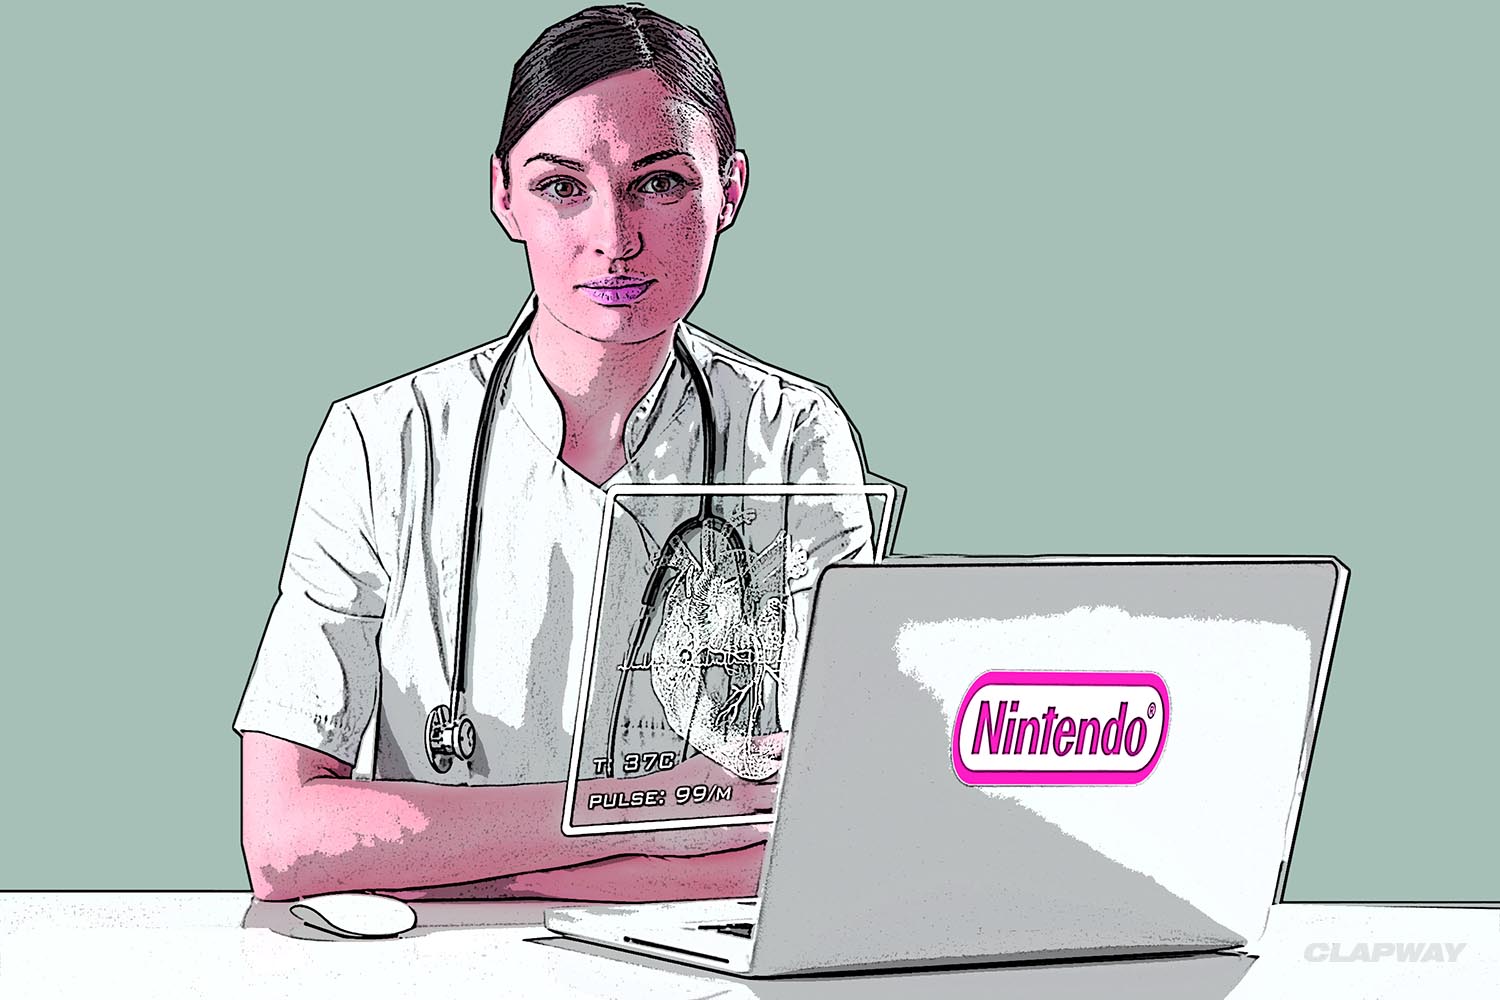 Unlike PS4 or Xbox, Nintendo Wii Makes you Healthy Clapway